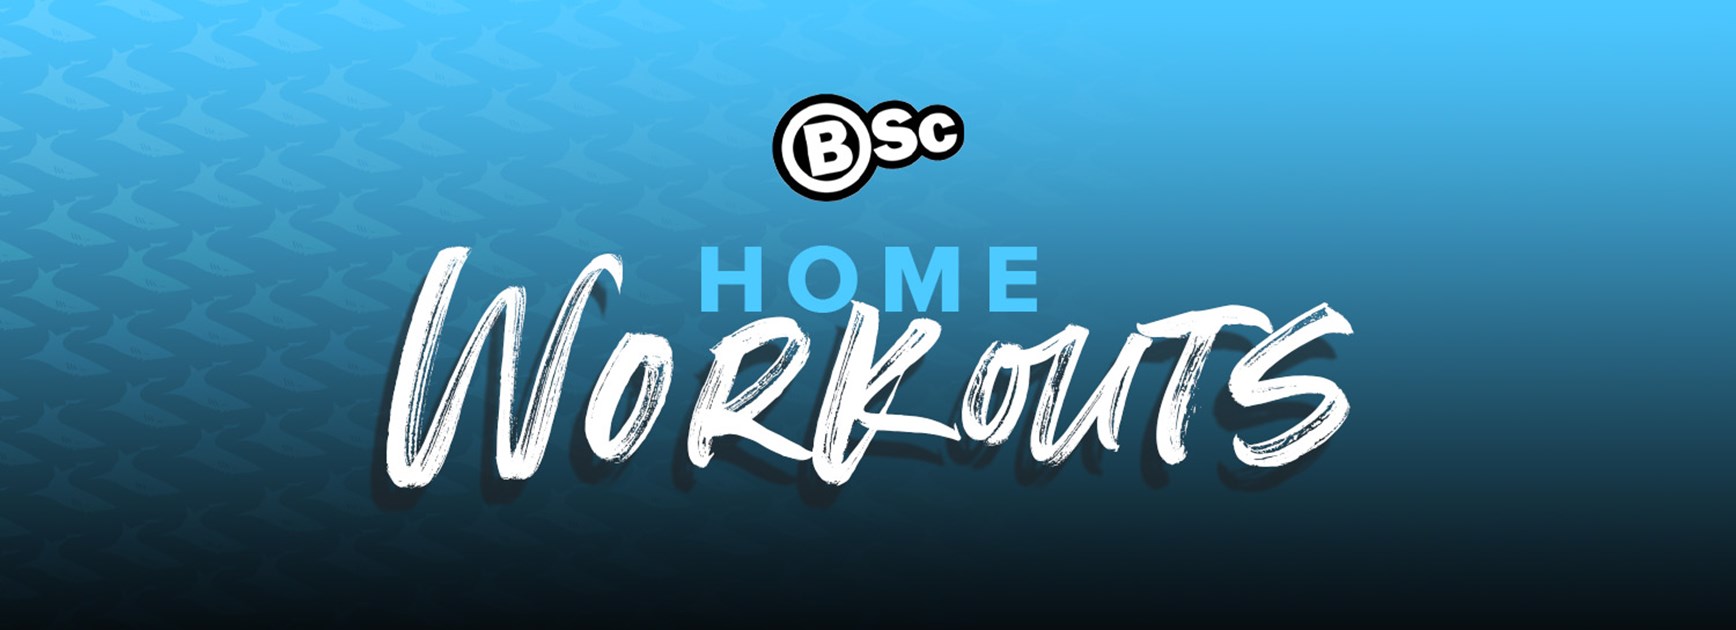 Home Workouts with Matt Jay